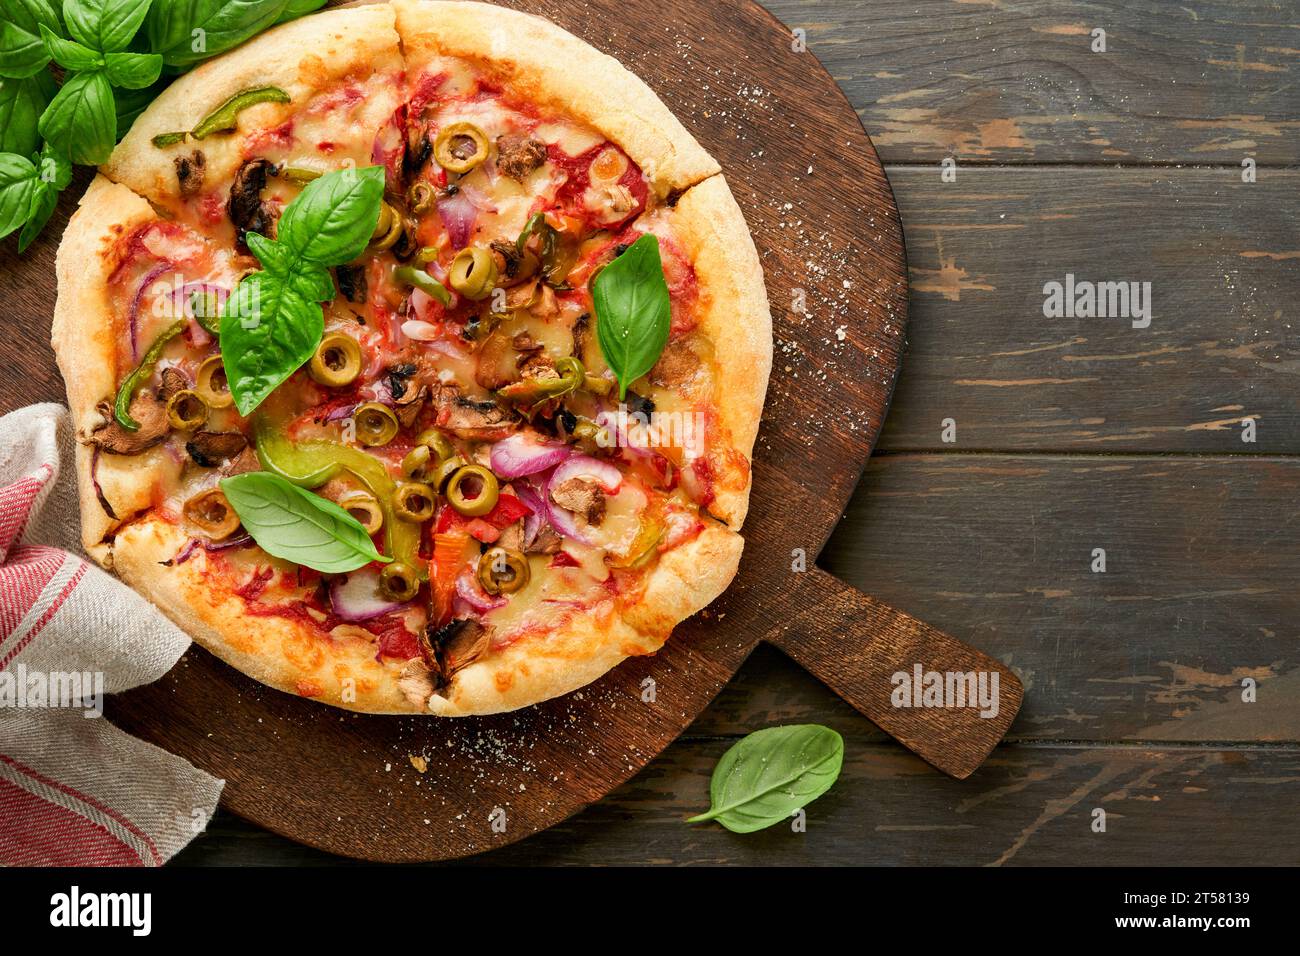 Homemade pizza. Traditional neapolitan pizza with olives, peppers, onions and mushrooms on wooden table backgrounds. Italian Traditional food. Top vie Stock Photo